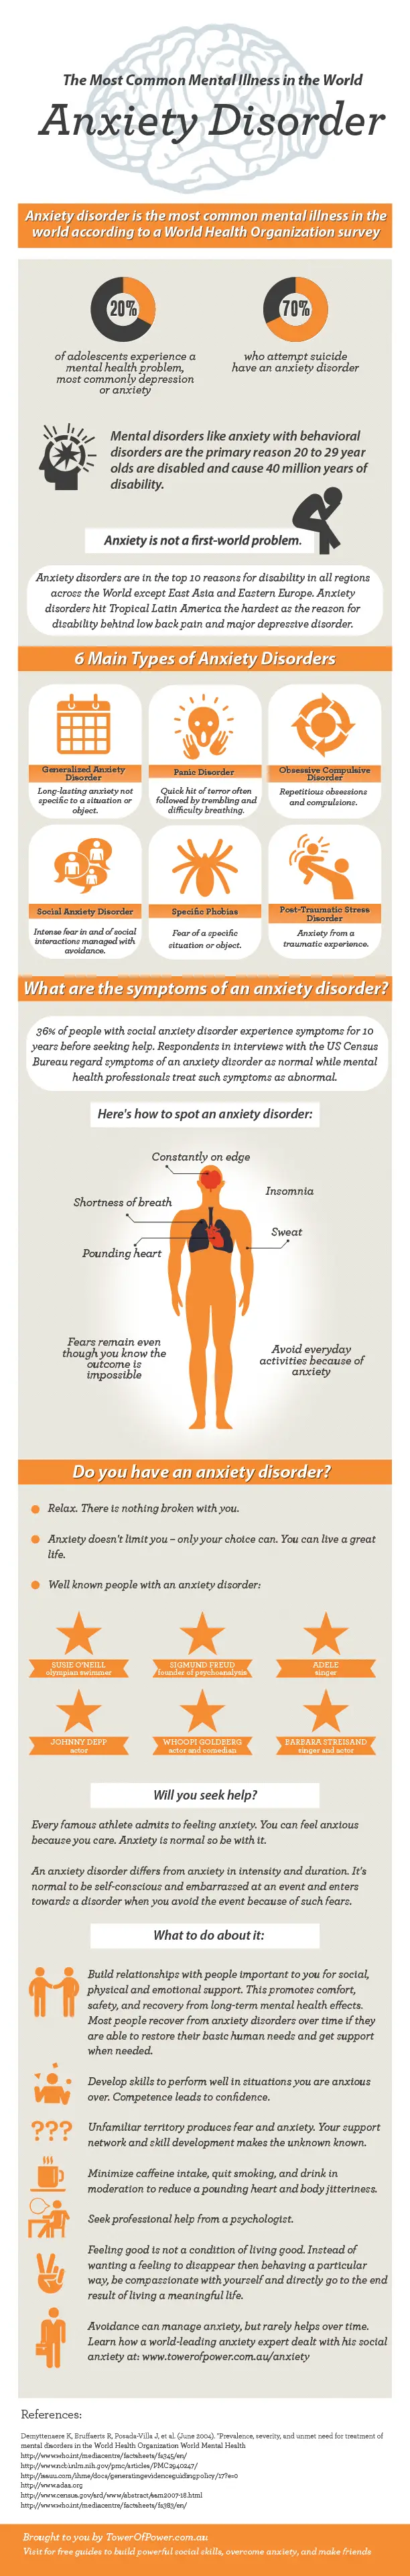 Anxiety disorder infographic